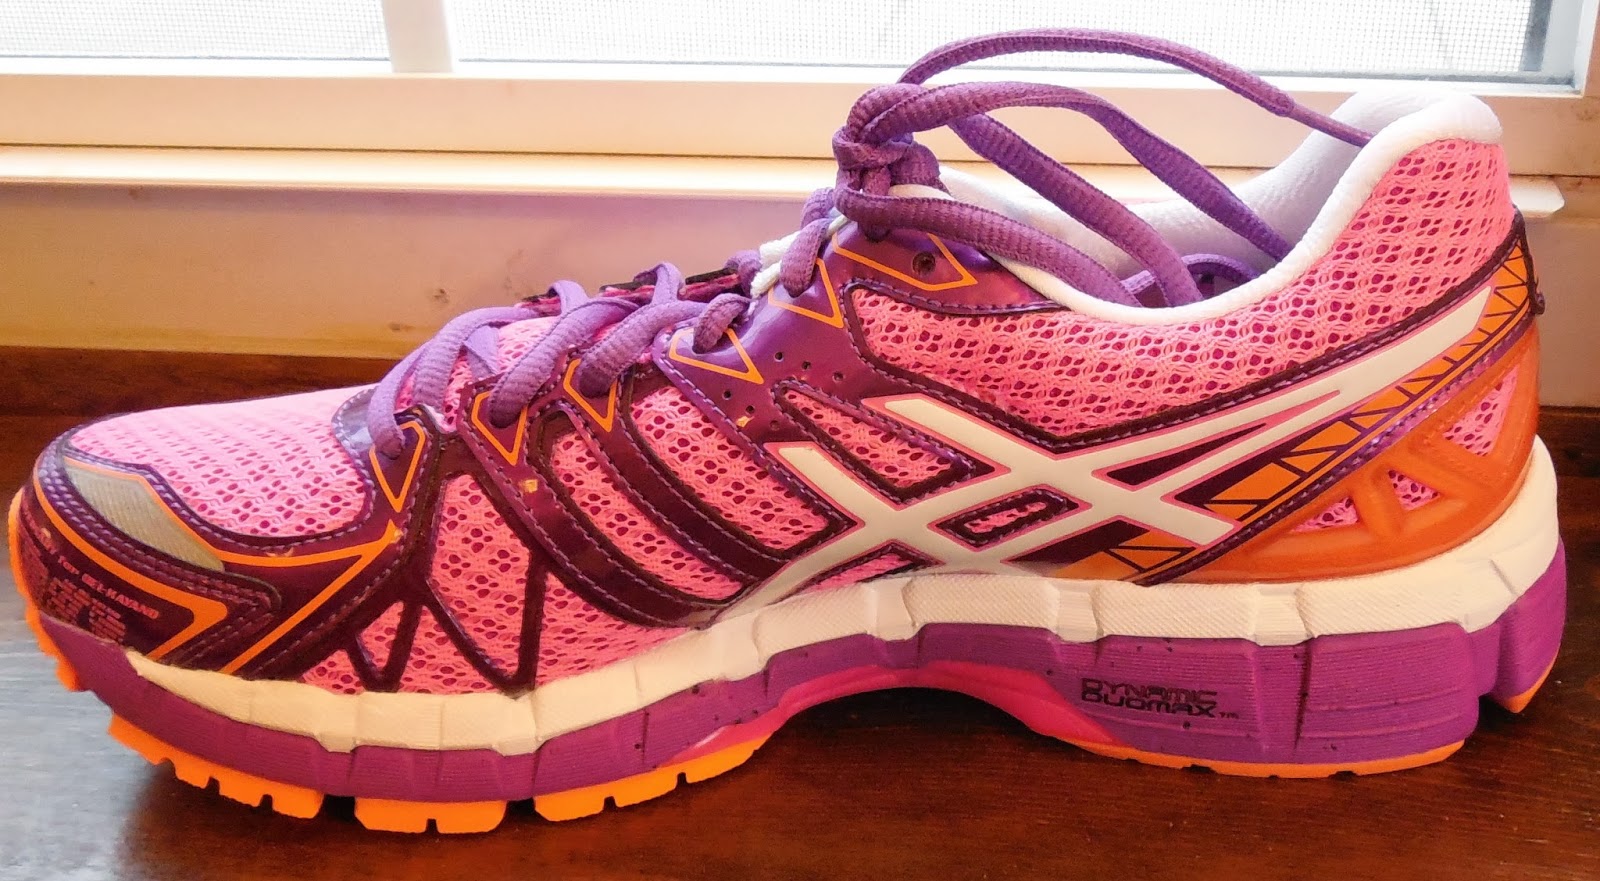 KindRunner: Asics Gel Kayano 20 Review | The Nutritionist Reviews